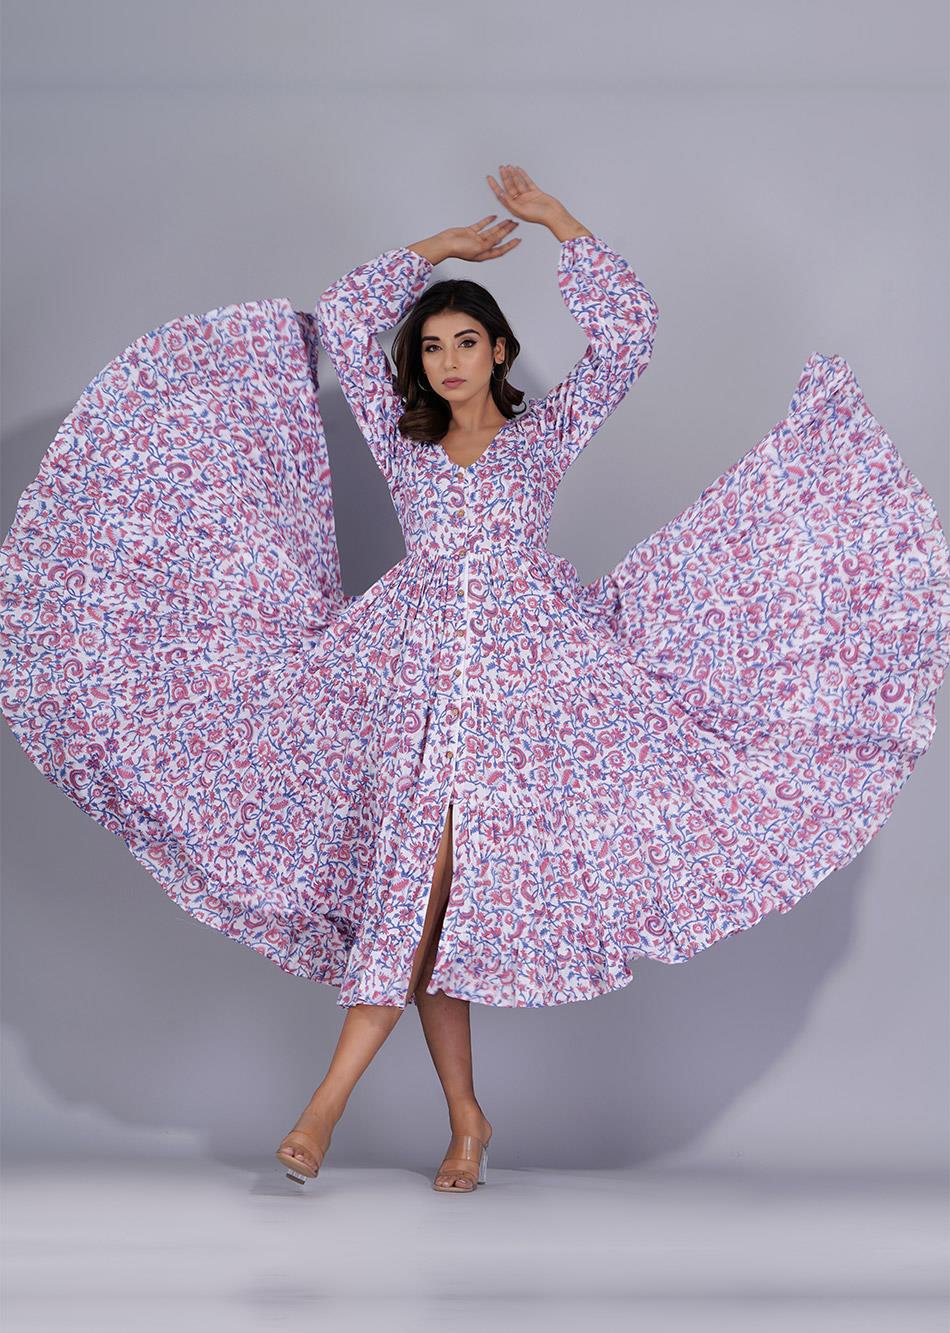 Baby Frocks Designs - Upto 50% to 80% OFF on Baby Long Party Wear Frocks  Dress Designs online at best prices - Flipkart.com